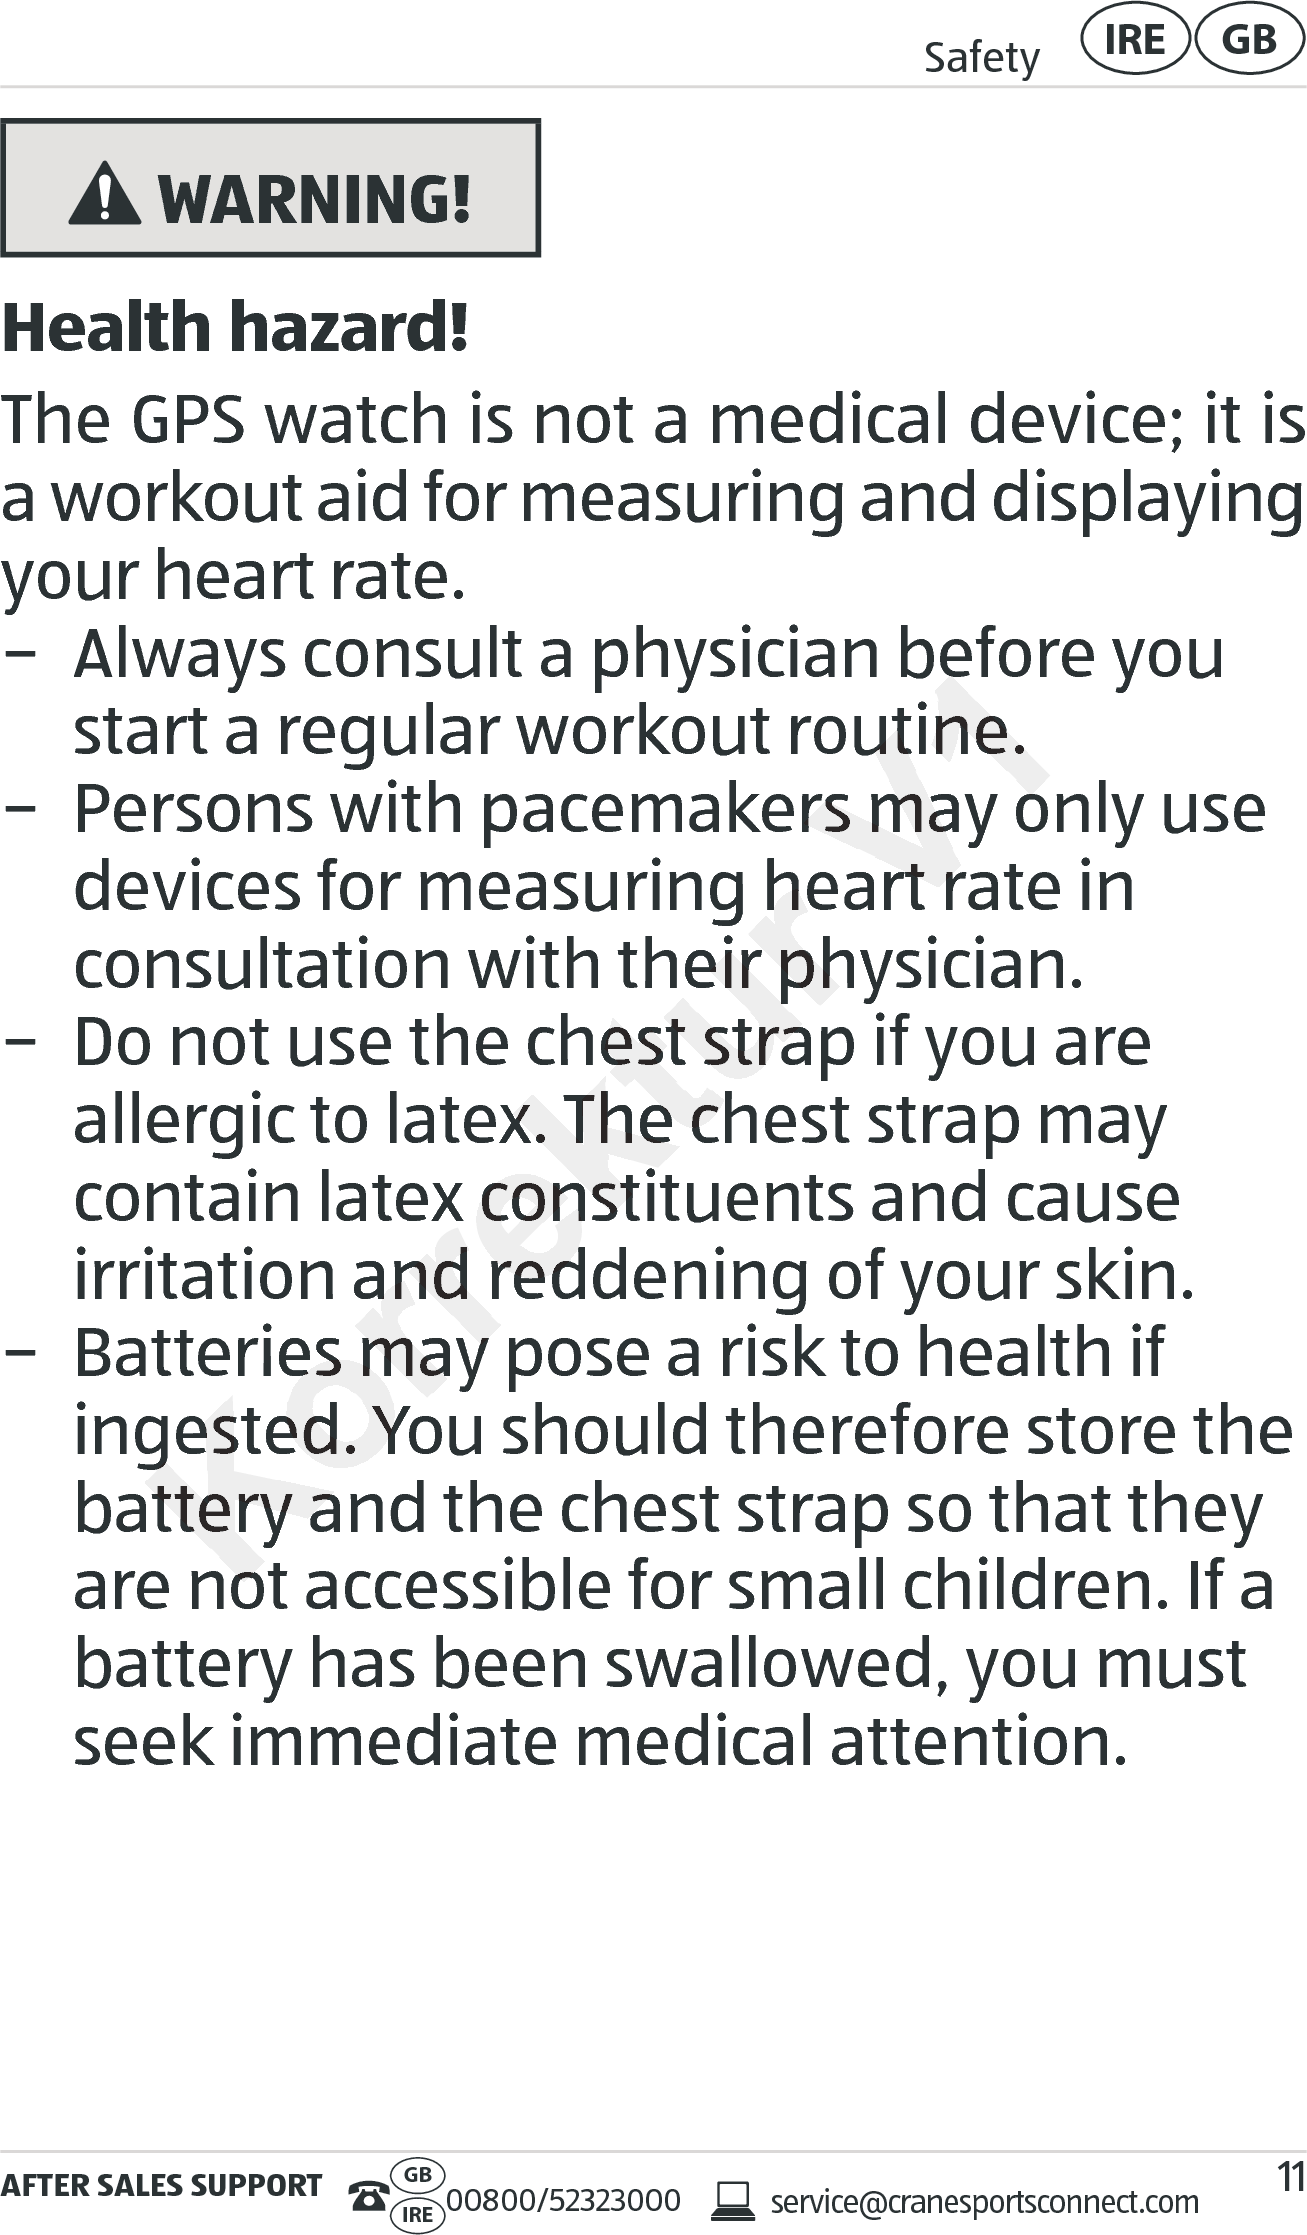 AFTER SALES SUPPORTservice@cranesportsconnect.comGBIRE 00800/52323000Safety GBIRE11 WARNING!Health hazard!The GPS watch is not a medical device; it is a workout aid for measuring and displaying your heart rate. − Always consult a physician before you start a regular workout routine.  − Persons with pacemakers may only use devices for measuring heart rate in  consultation with their physician. − Do not use the chest strap if you are allergic to latex. The chest strap may contain latex constituents and cause irritation and reddening of your skin. − Batteries may pose a risk to health if ingested. You should therefore store the battery and the chest strap so that they are not accessible for small children. If a battery has been swallowed, you must seek immediate medical attention.Korrektur devices for measuring heart rate in  devices for measuring heart rate in  consultation with their physician.consultation with their physician.− Do not use the chest strap if you ar− Do not use the chest strap if you arallergic to latex. The chest strap may allergic to latex. The chest strap may contain latex constituents and cause contain latex constituents and cause irritation and reddening of your skin.irritation and reddening of your skin.− Batteries may pose a risk t− Batteries may pose a risk tingested. You should therefore store the ingested. You should therefore store the battery and the chest strap so that they battery and the chest strap so that they are not accessible for small children. If a are not accessible for small children. If a V1− Always consult a physician before you − Always consult a physician before you art a regular workout routine. art a regular workout routine. ers may only use ers may only use devices for measuring heart rate in  devices for measuring heart rate in  